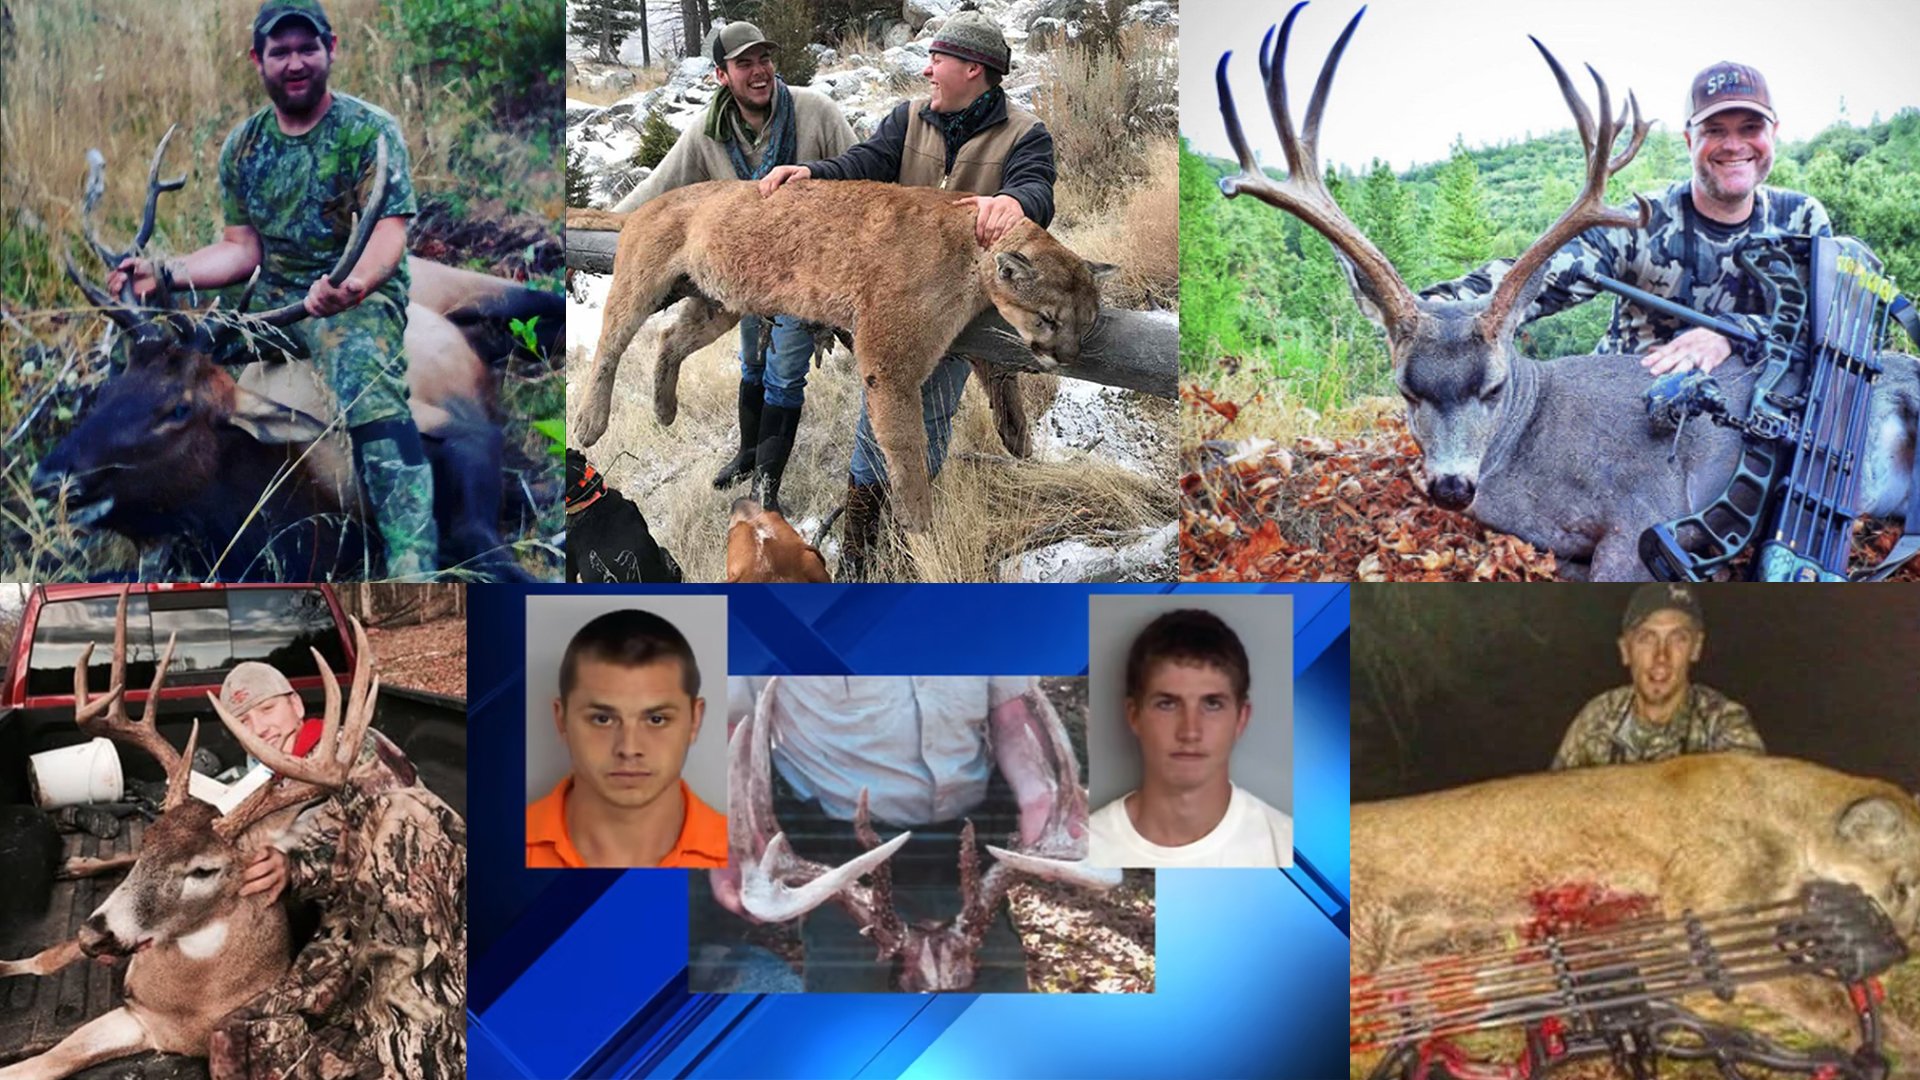 7 Poachers Busted By Social Media Posts